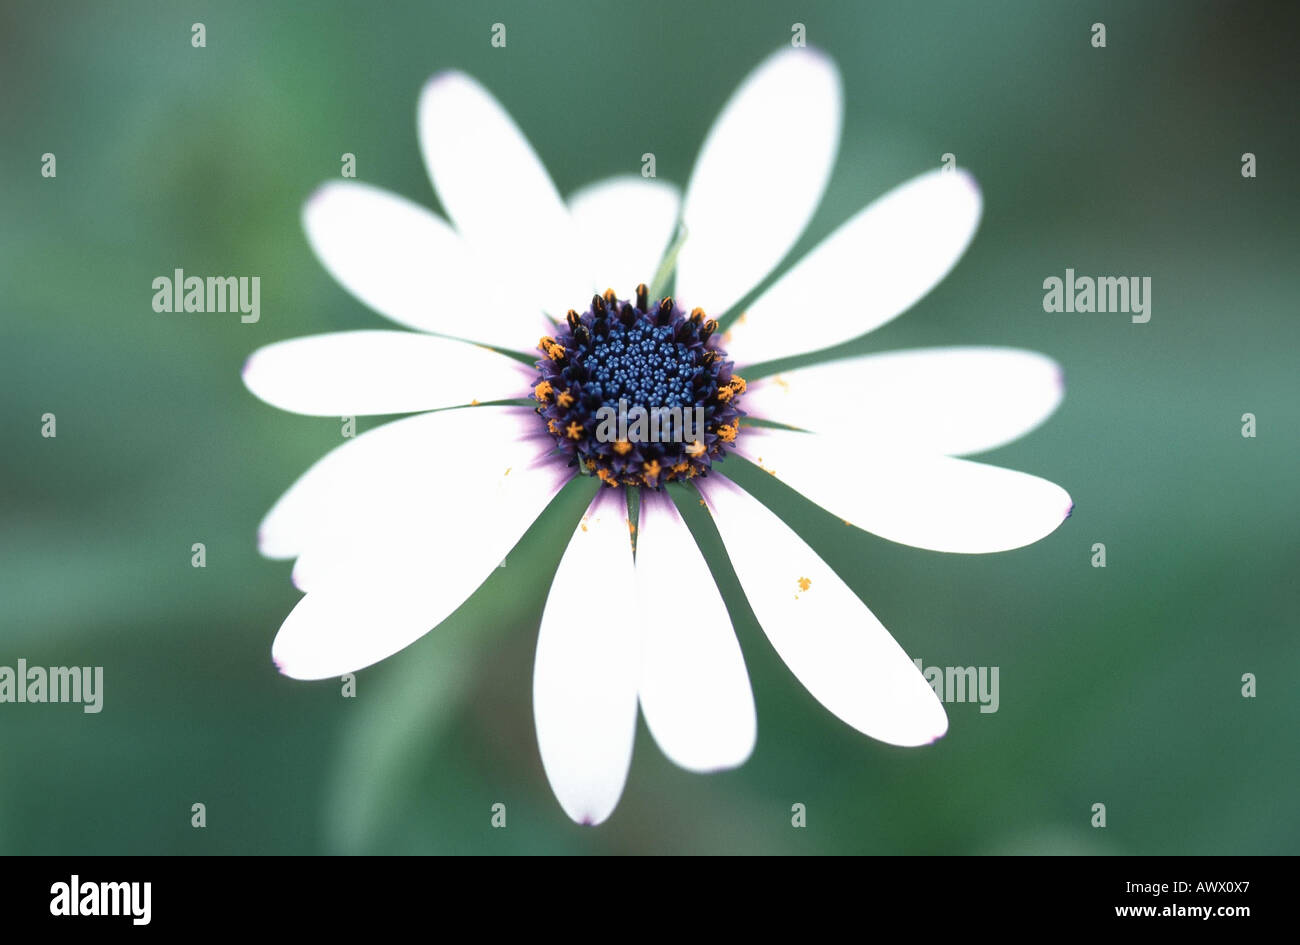 African Daisy, Lavender African Daisy, Norlindh freeway daisy (Osteospermum ecklonis), inflorescence, double exposure Stock Photo